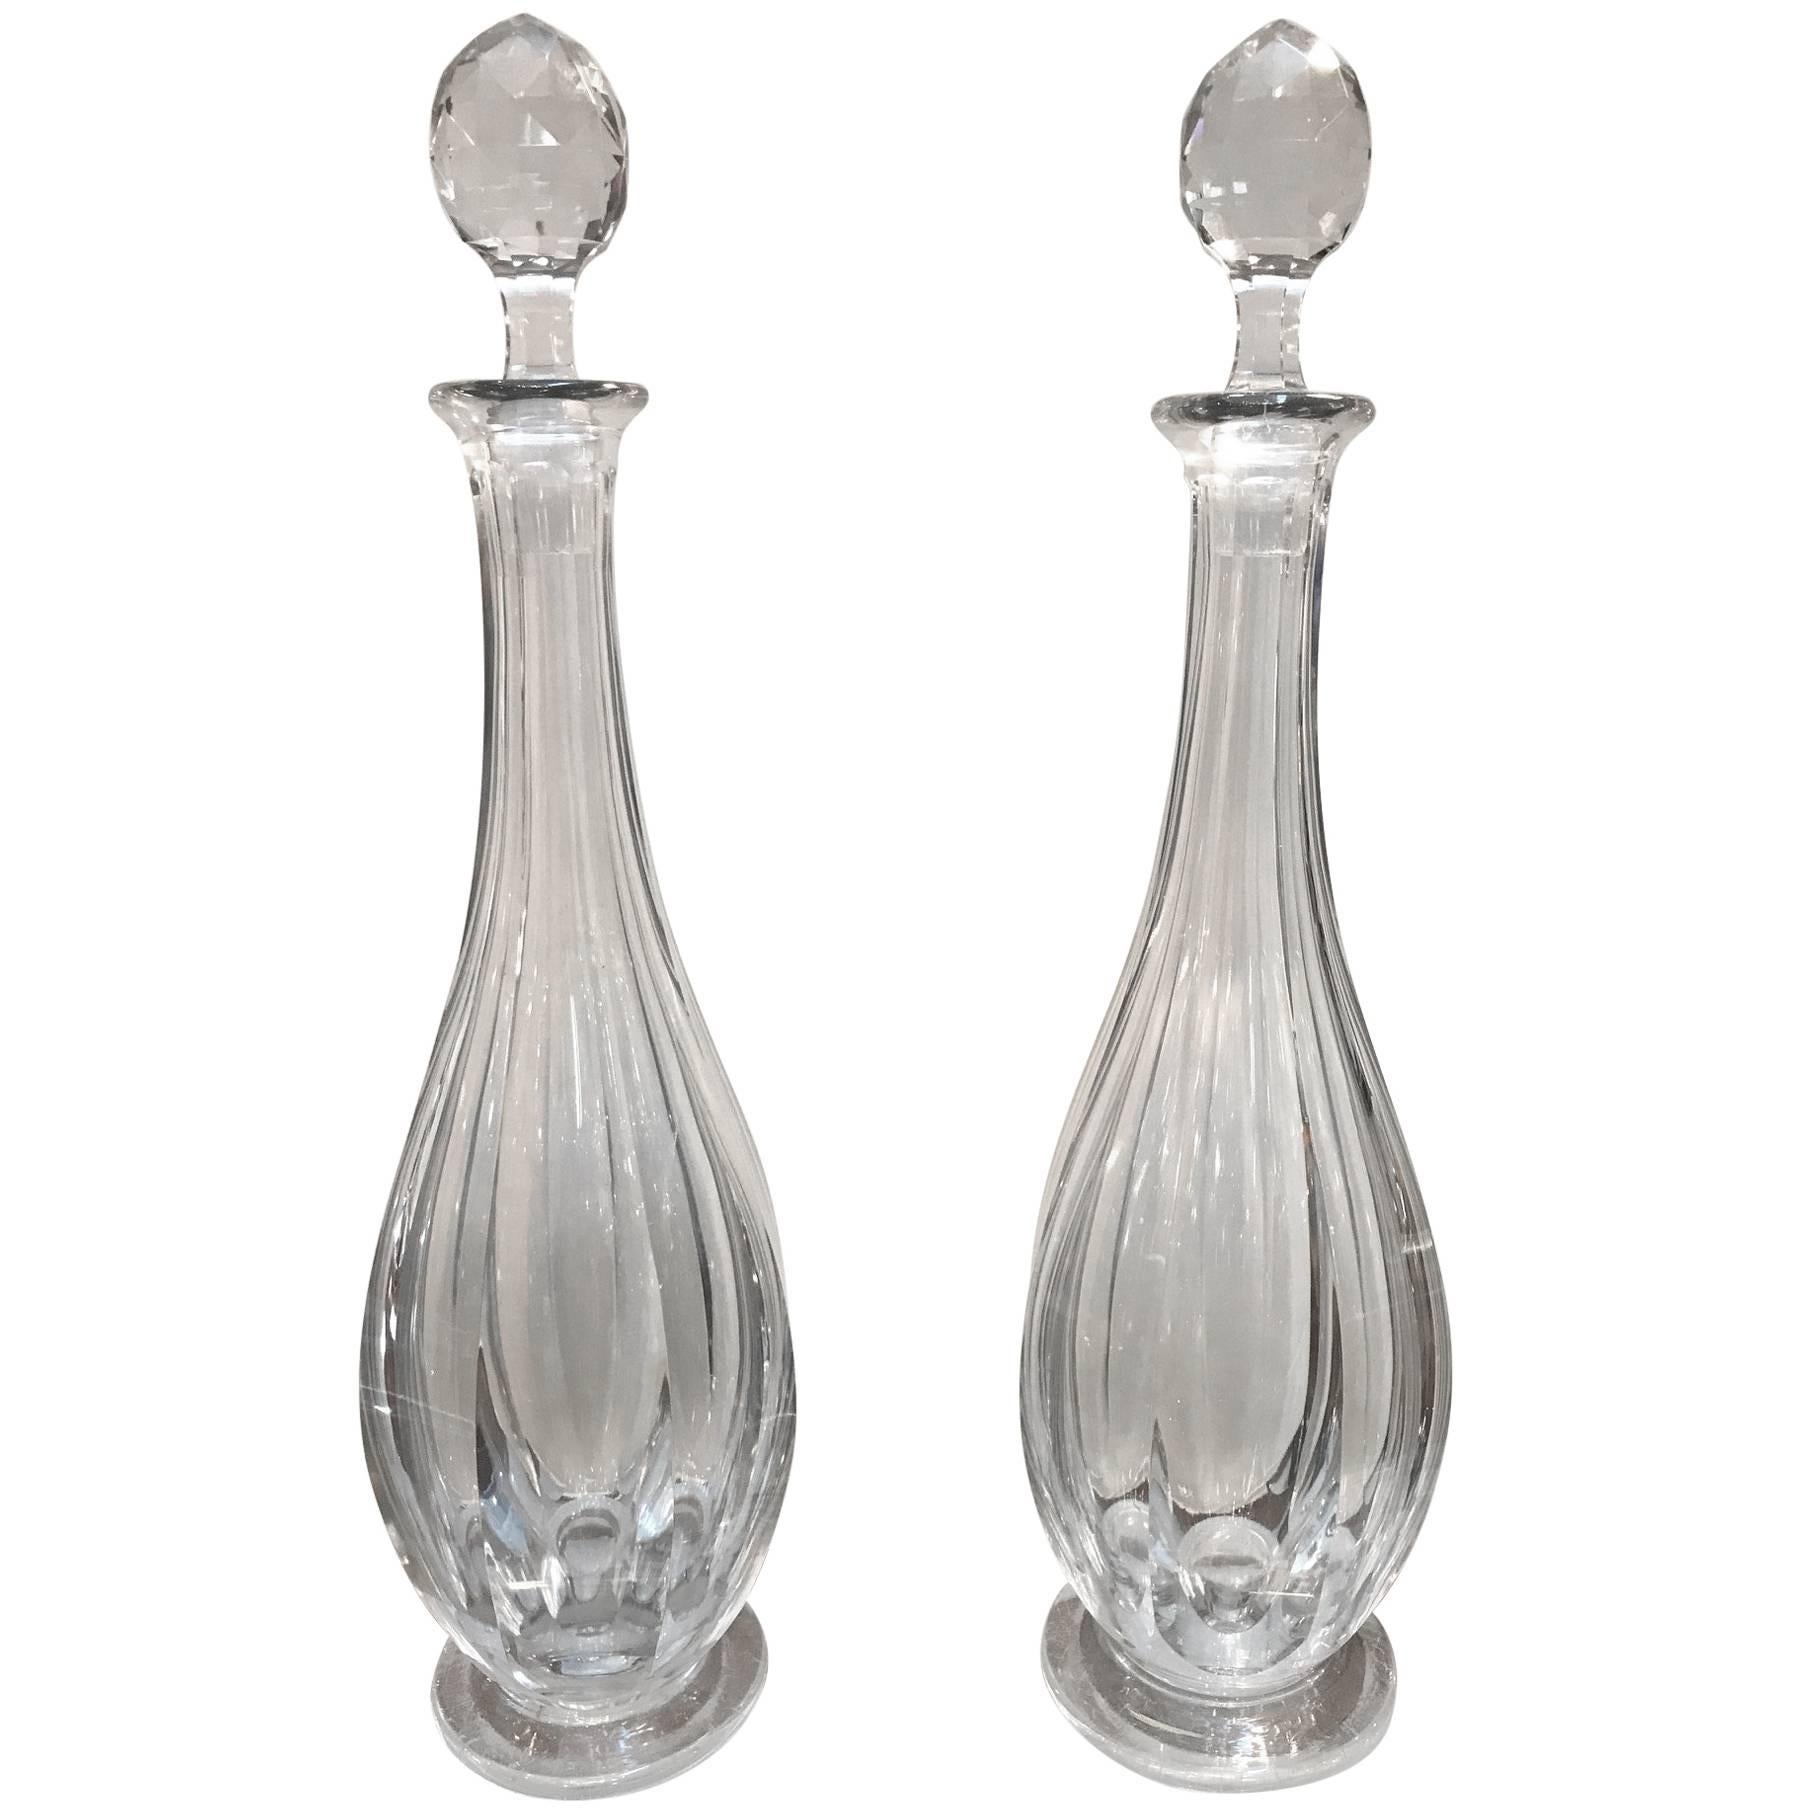 Pair of Exceptional 19th Century English Tall Glass Decanters